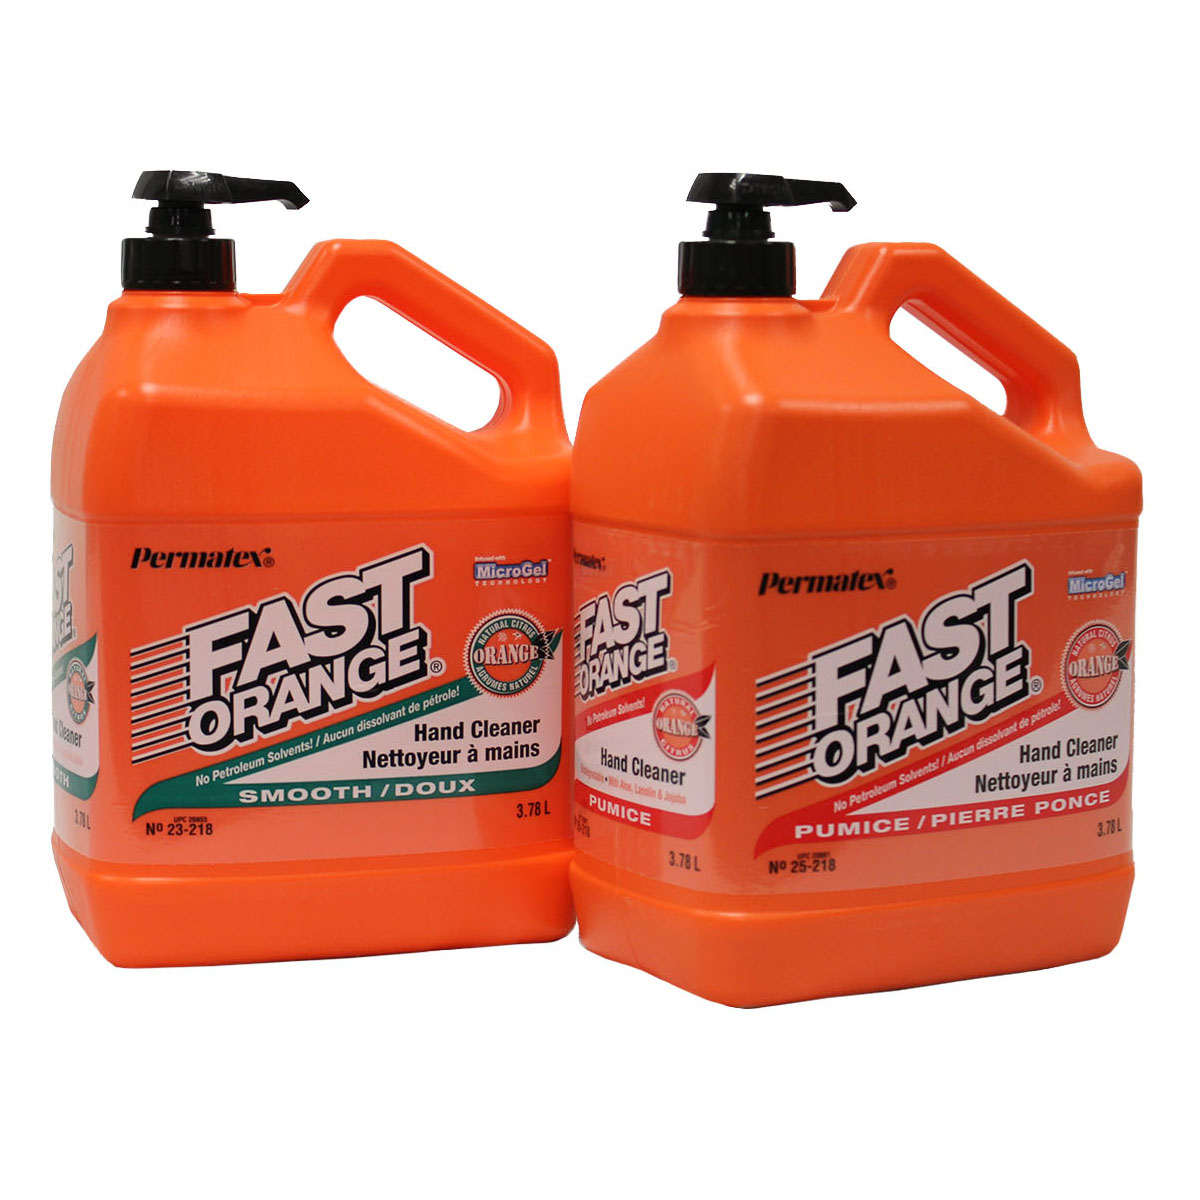 Fast Orange Hand Cleaner - with Pumice - 3.78 L